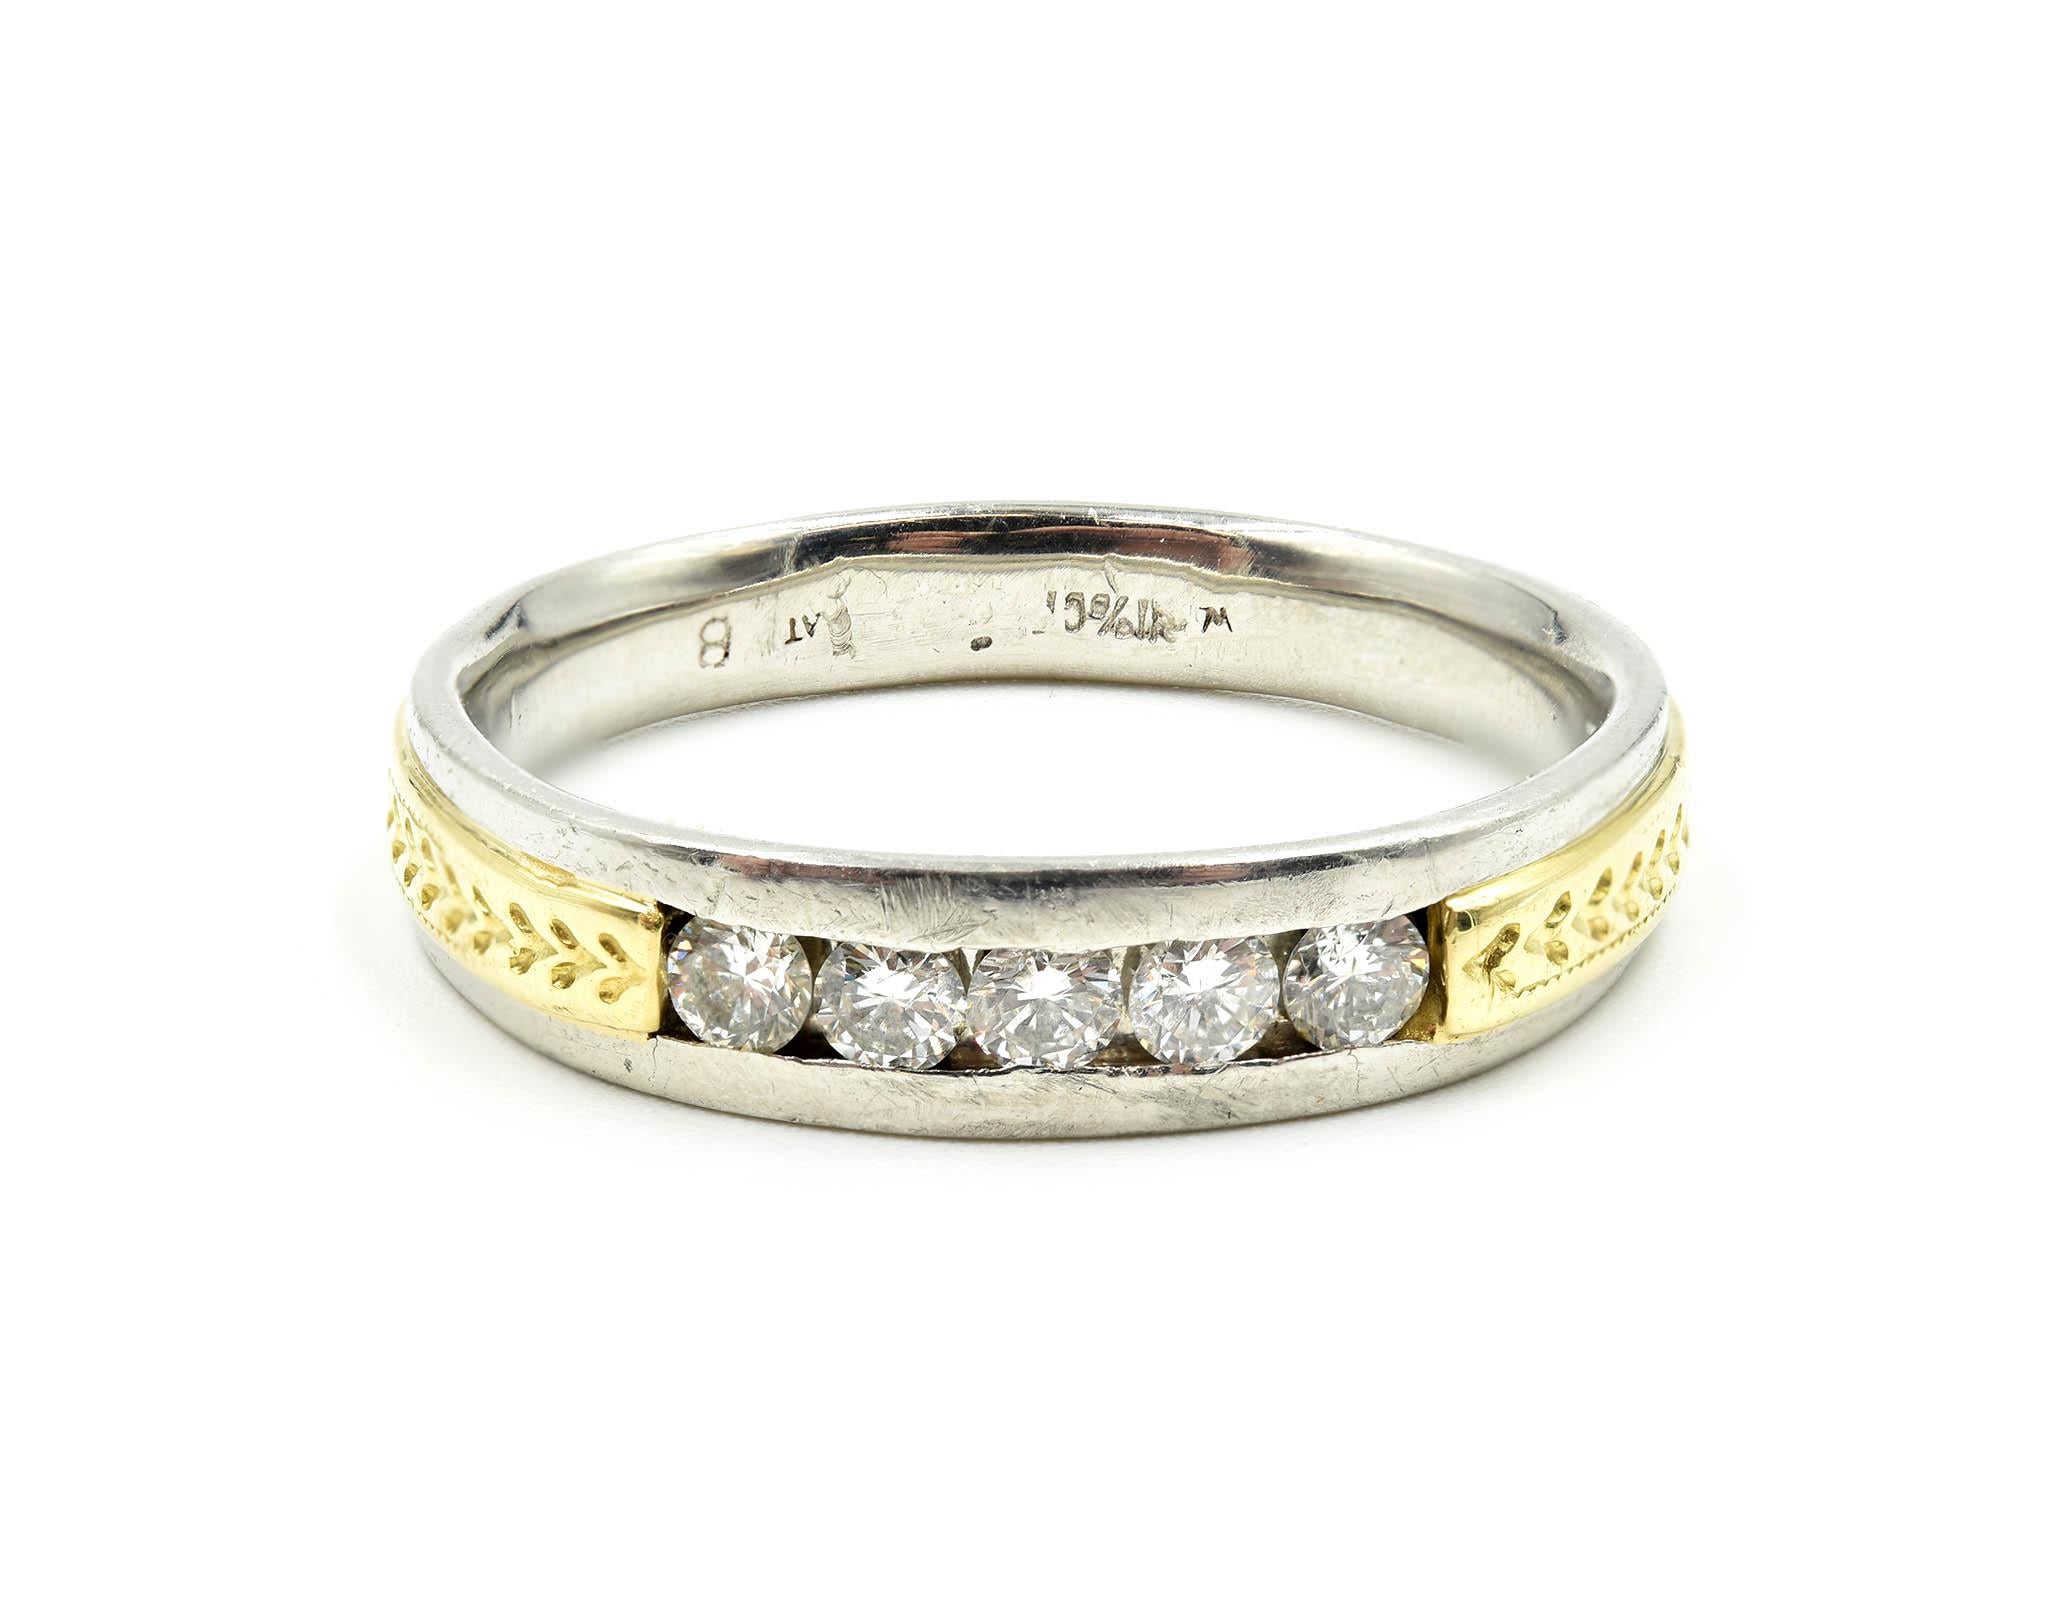 0.50 Carat Diamond Platinum and 18 Karat Yellow Gold Band In Excellent Condition For Sale In Scottsdale, AZ